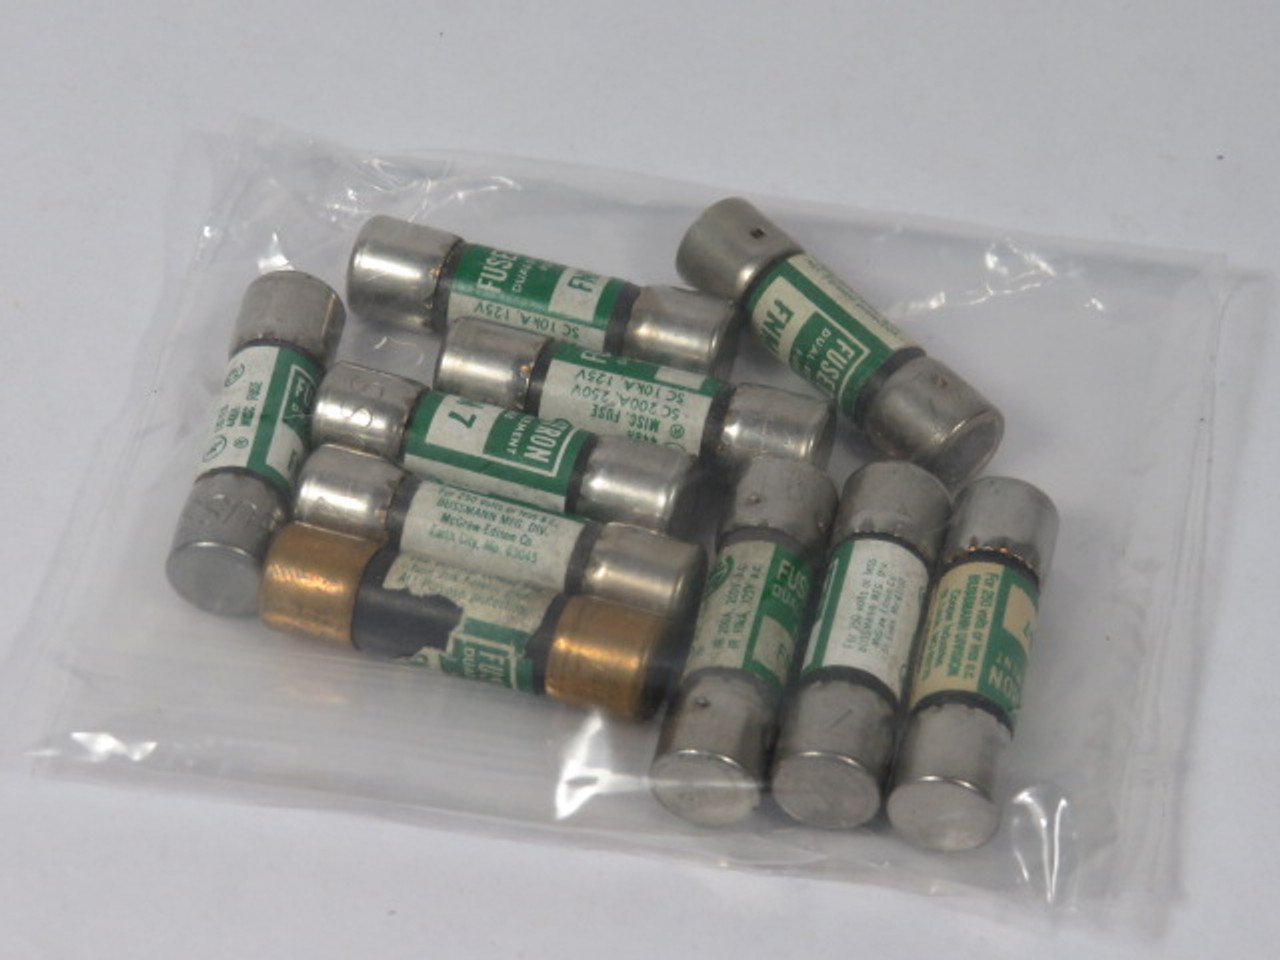 Fusetron FNM-7 Dual Element Fuse 7A 250V Lot of 10 USED